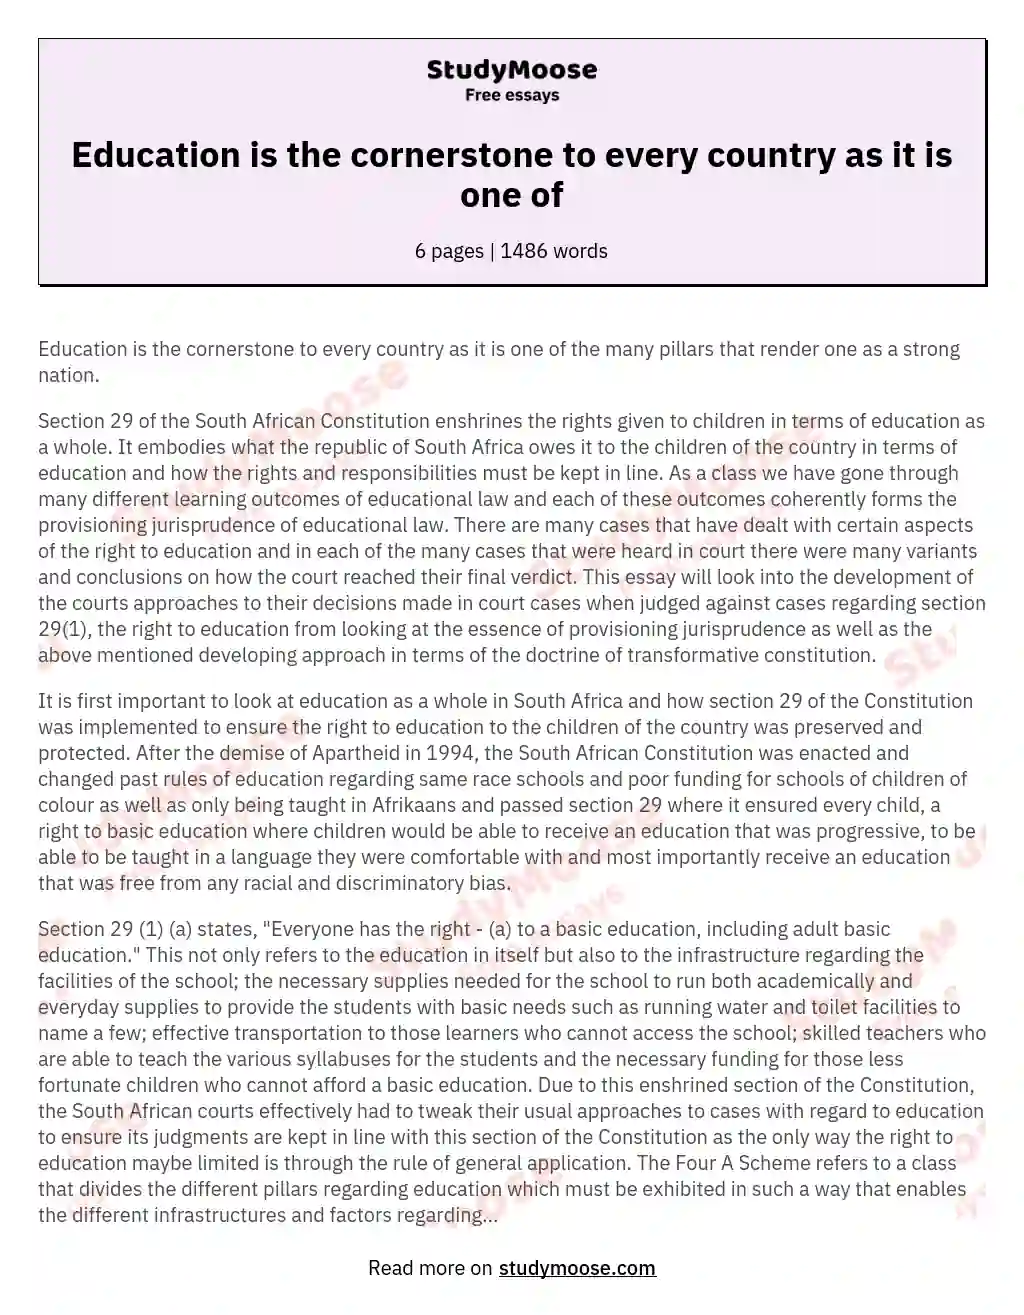 Education is the cornerstone to every country as it is one of essay